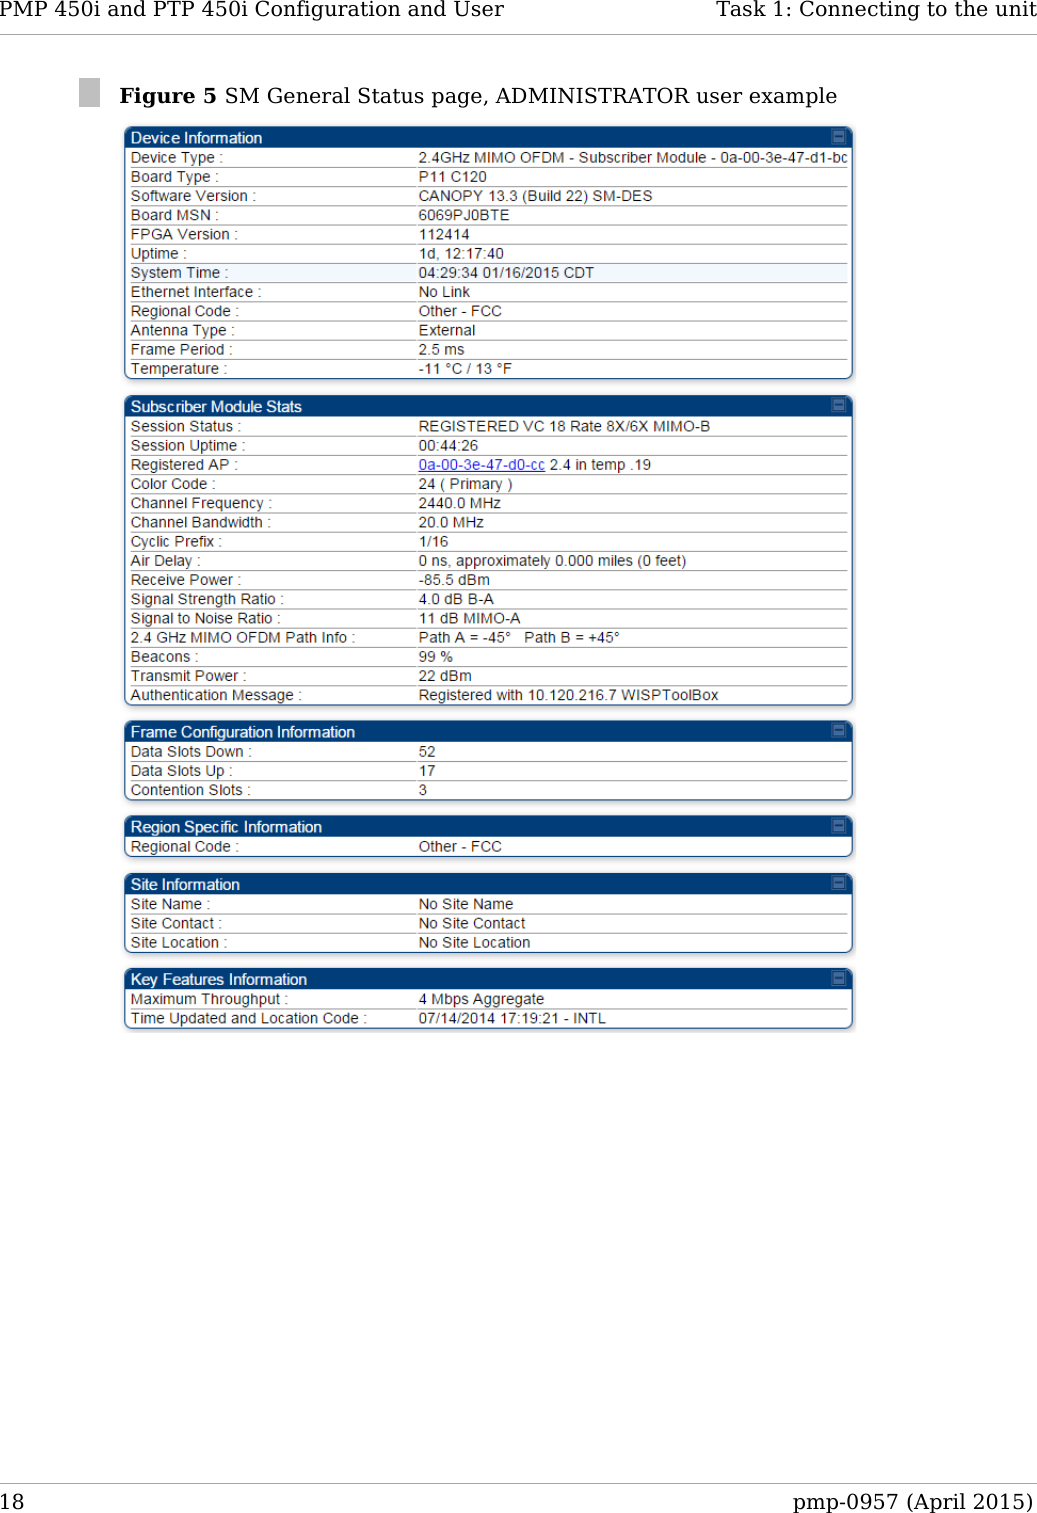 PMP 450i and PTP 450i Configuration and User   Task 1: Connecting to the unit   Figure 5 SM General Status page, ADMINISTRATOR user example  18  pmp-0957 (April 2015)  